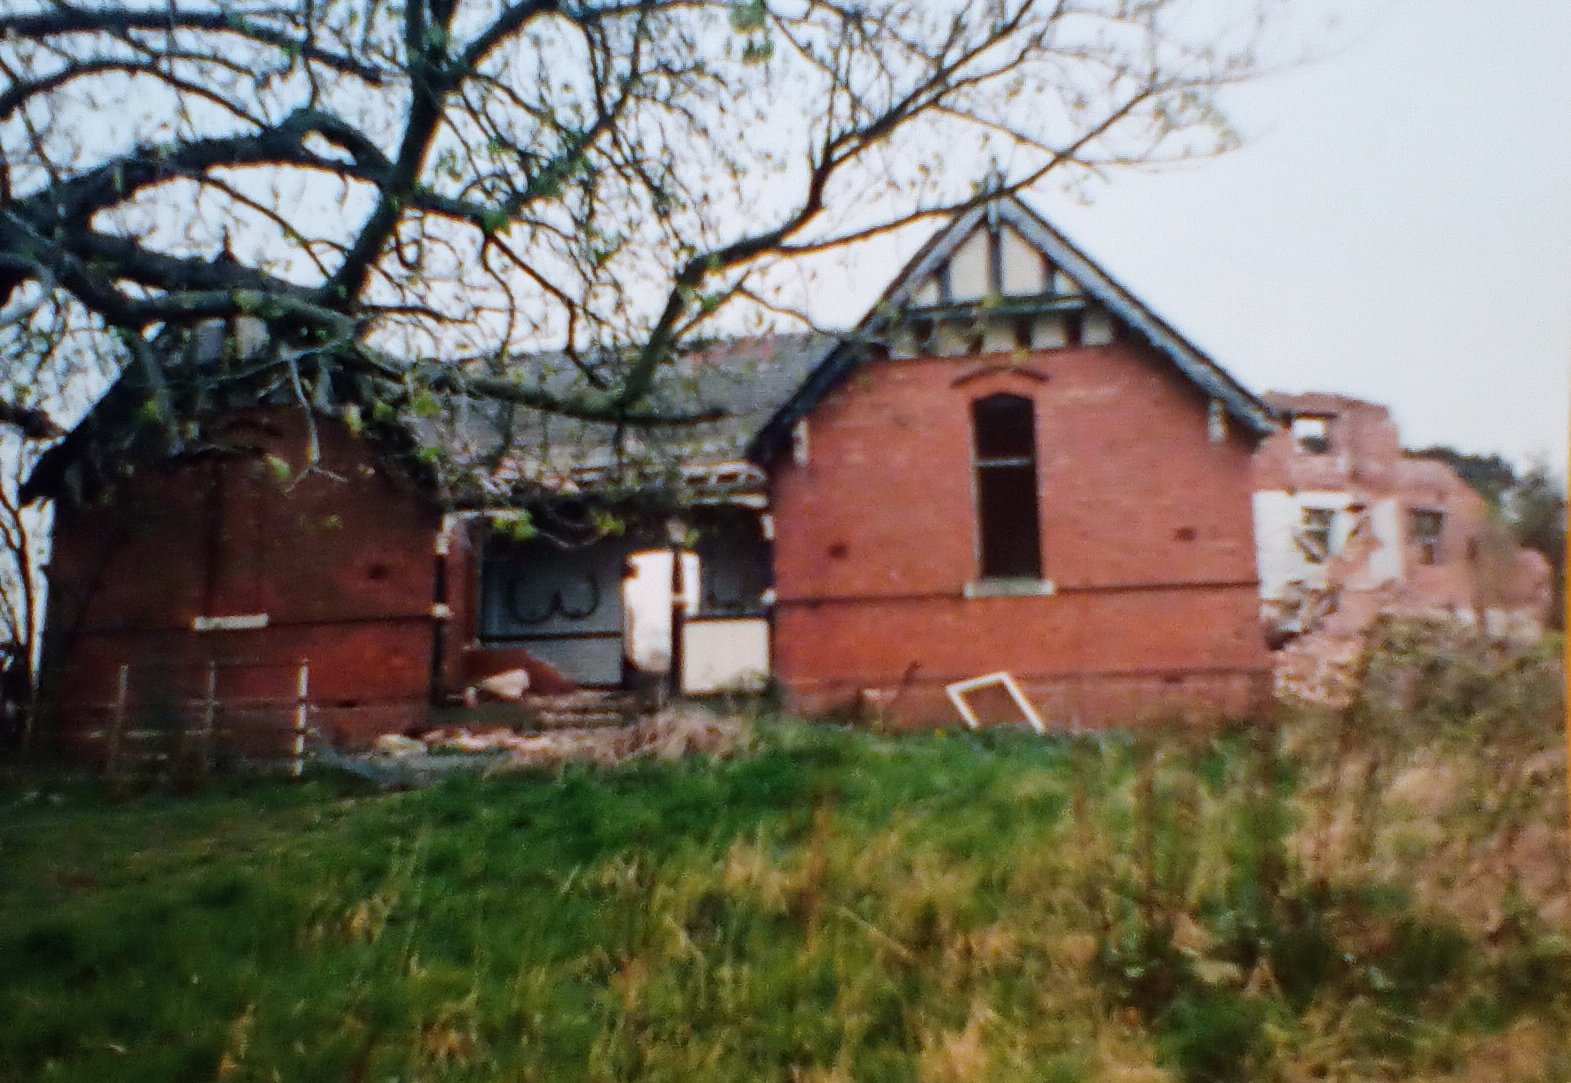 April 2003, the dairy might have supplied milk, cheese and butter to the hospital. Photo copyright Charlie Bateman